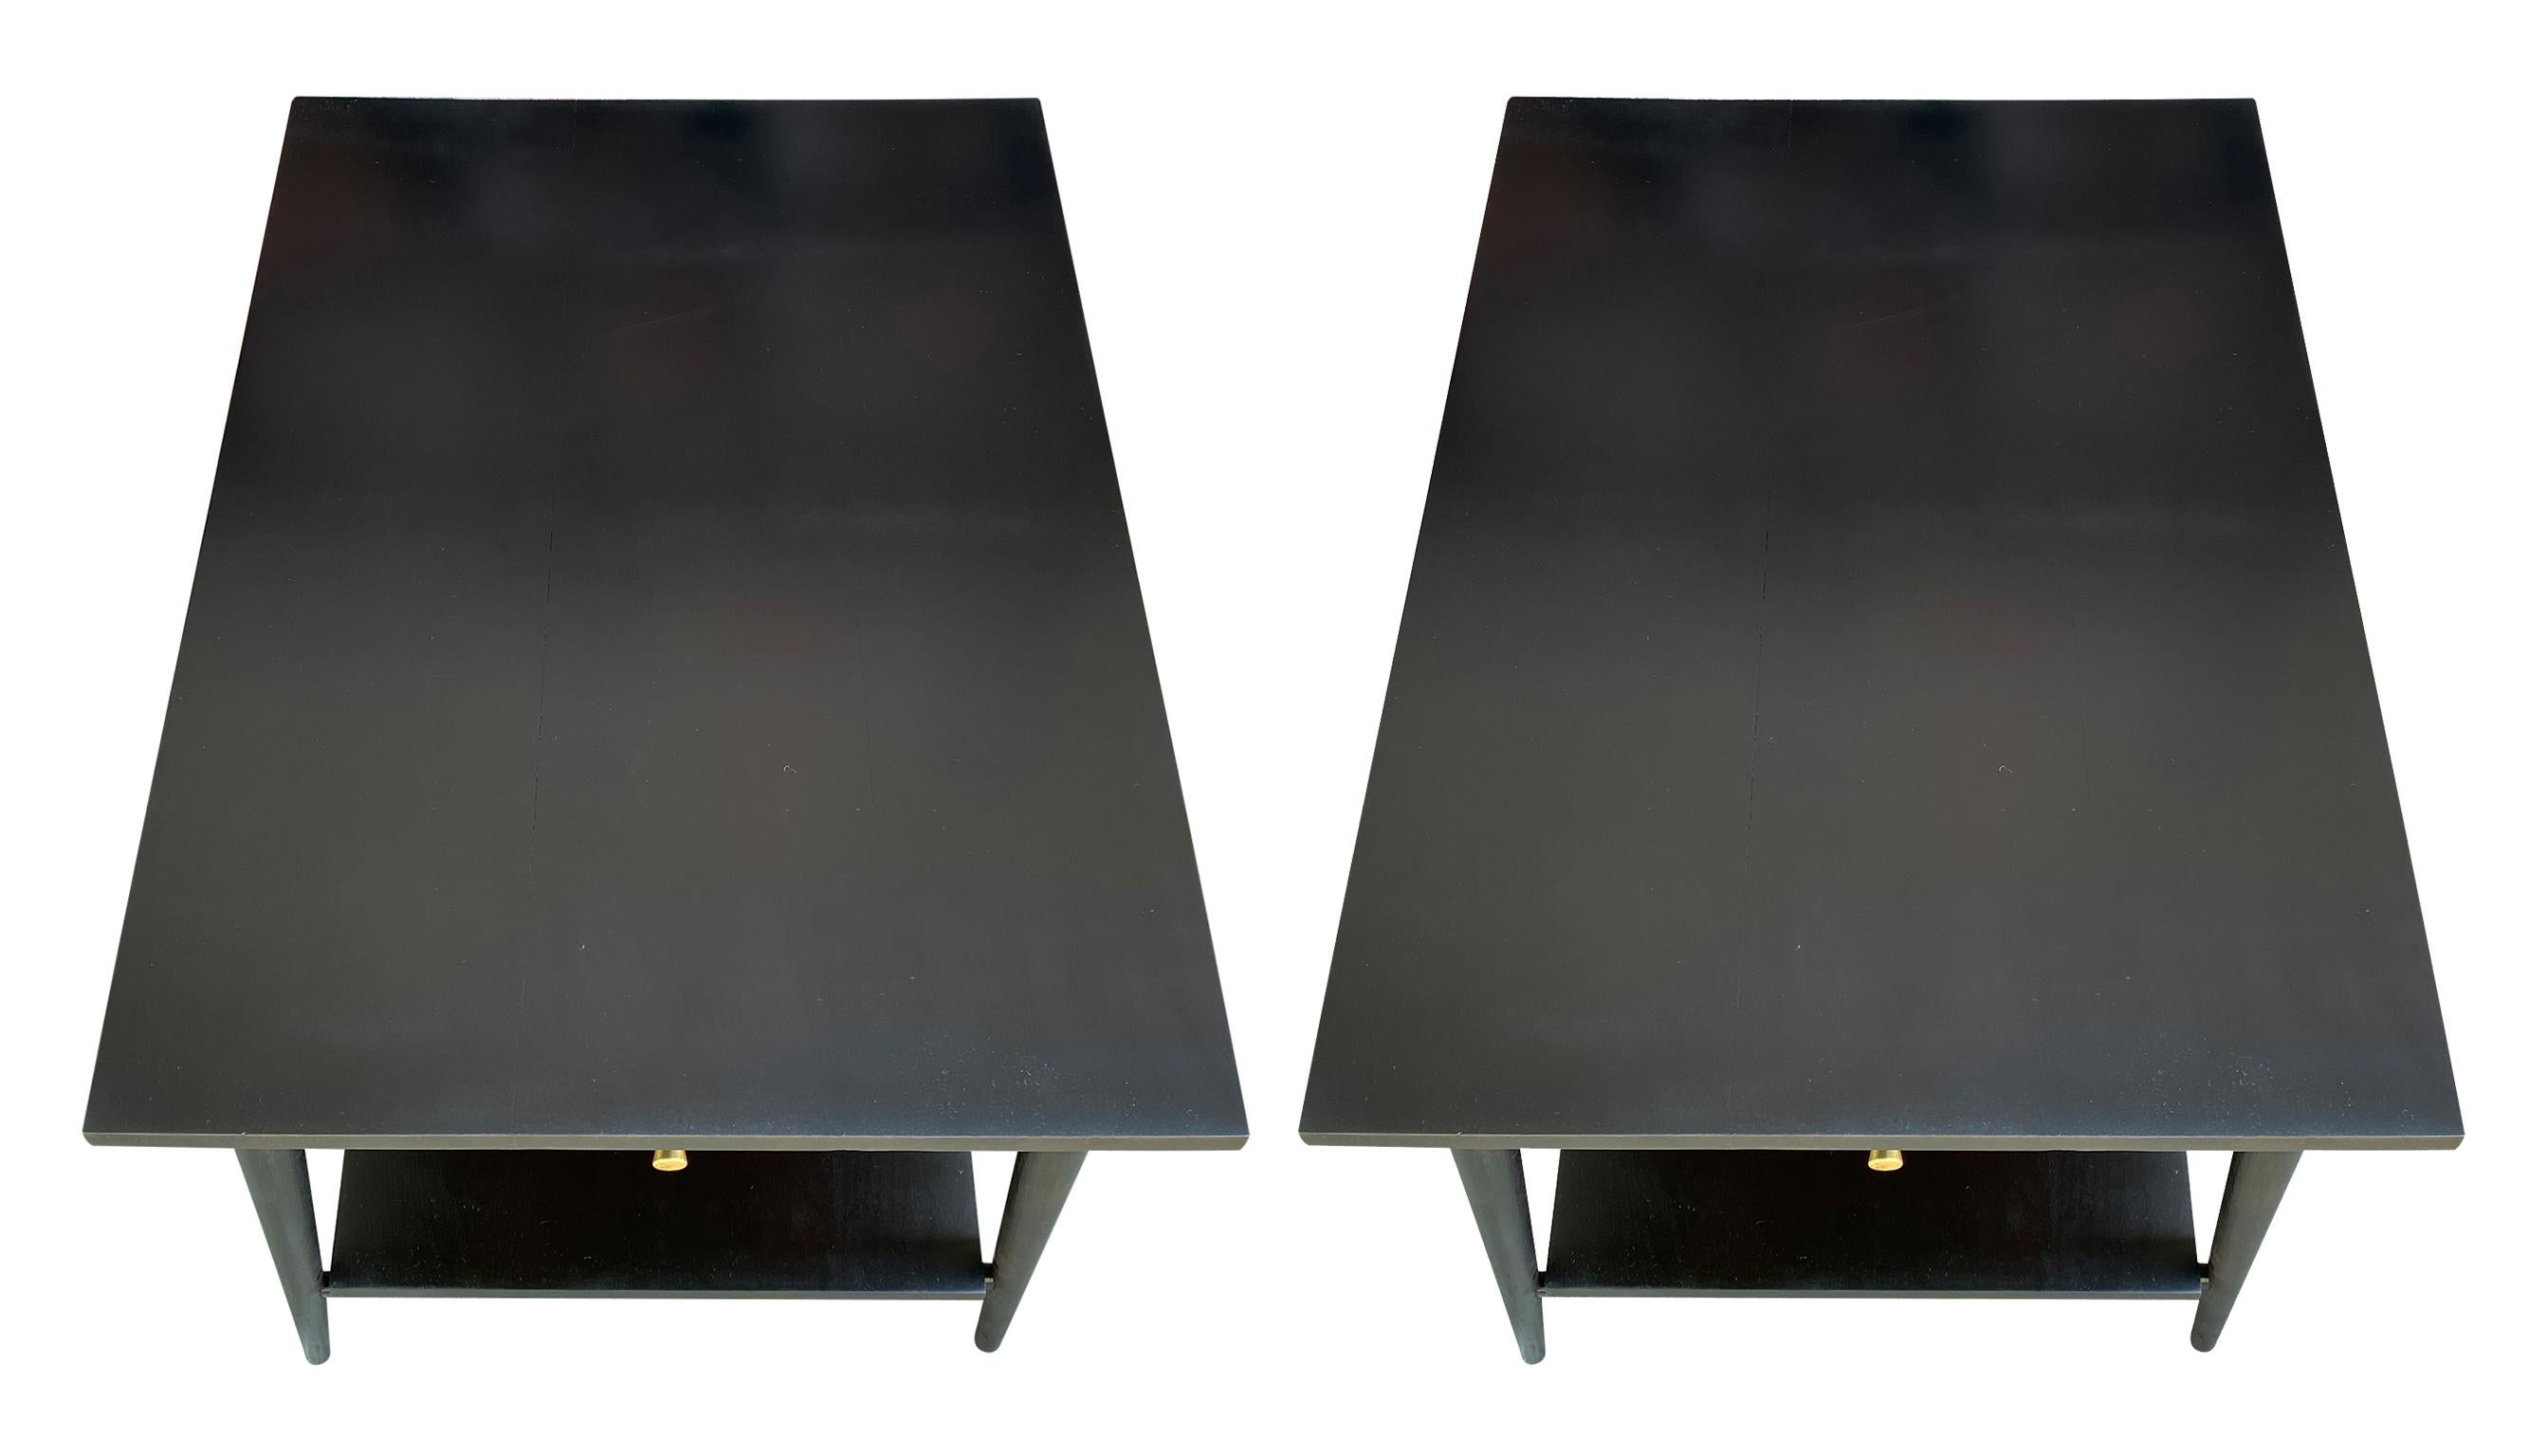 Midcentury Paul McCobb #1587 Nightstands Black Lacquer Brass Knobs End Tables For Sale 1